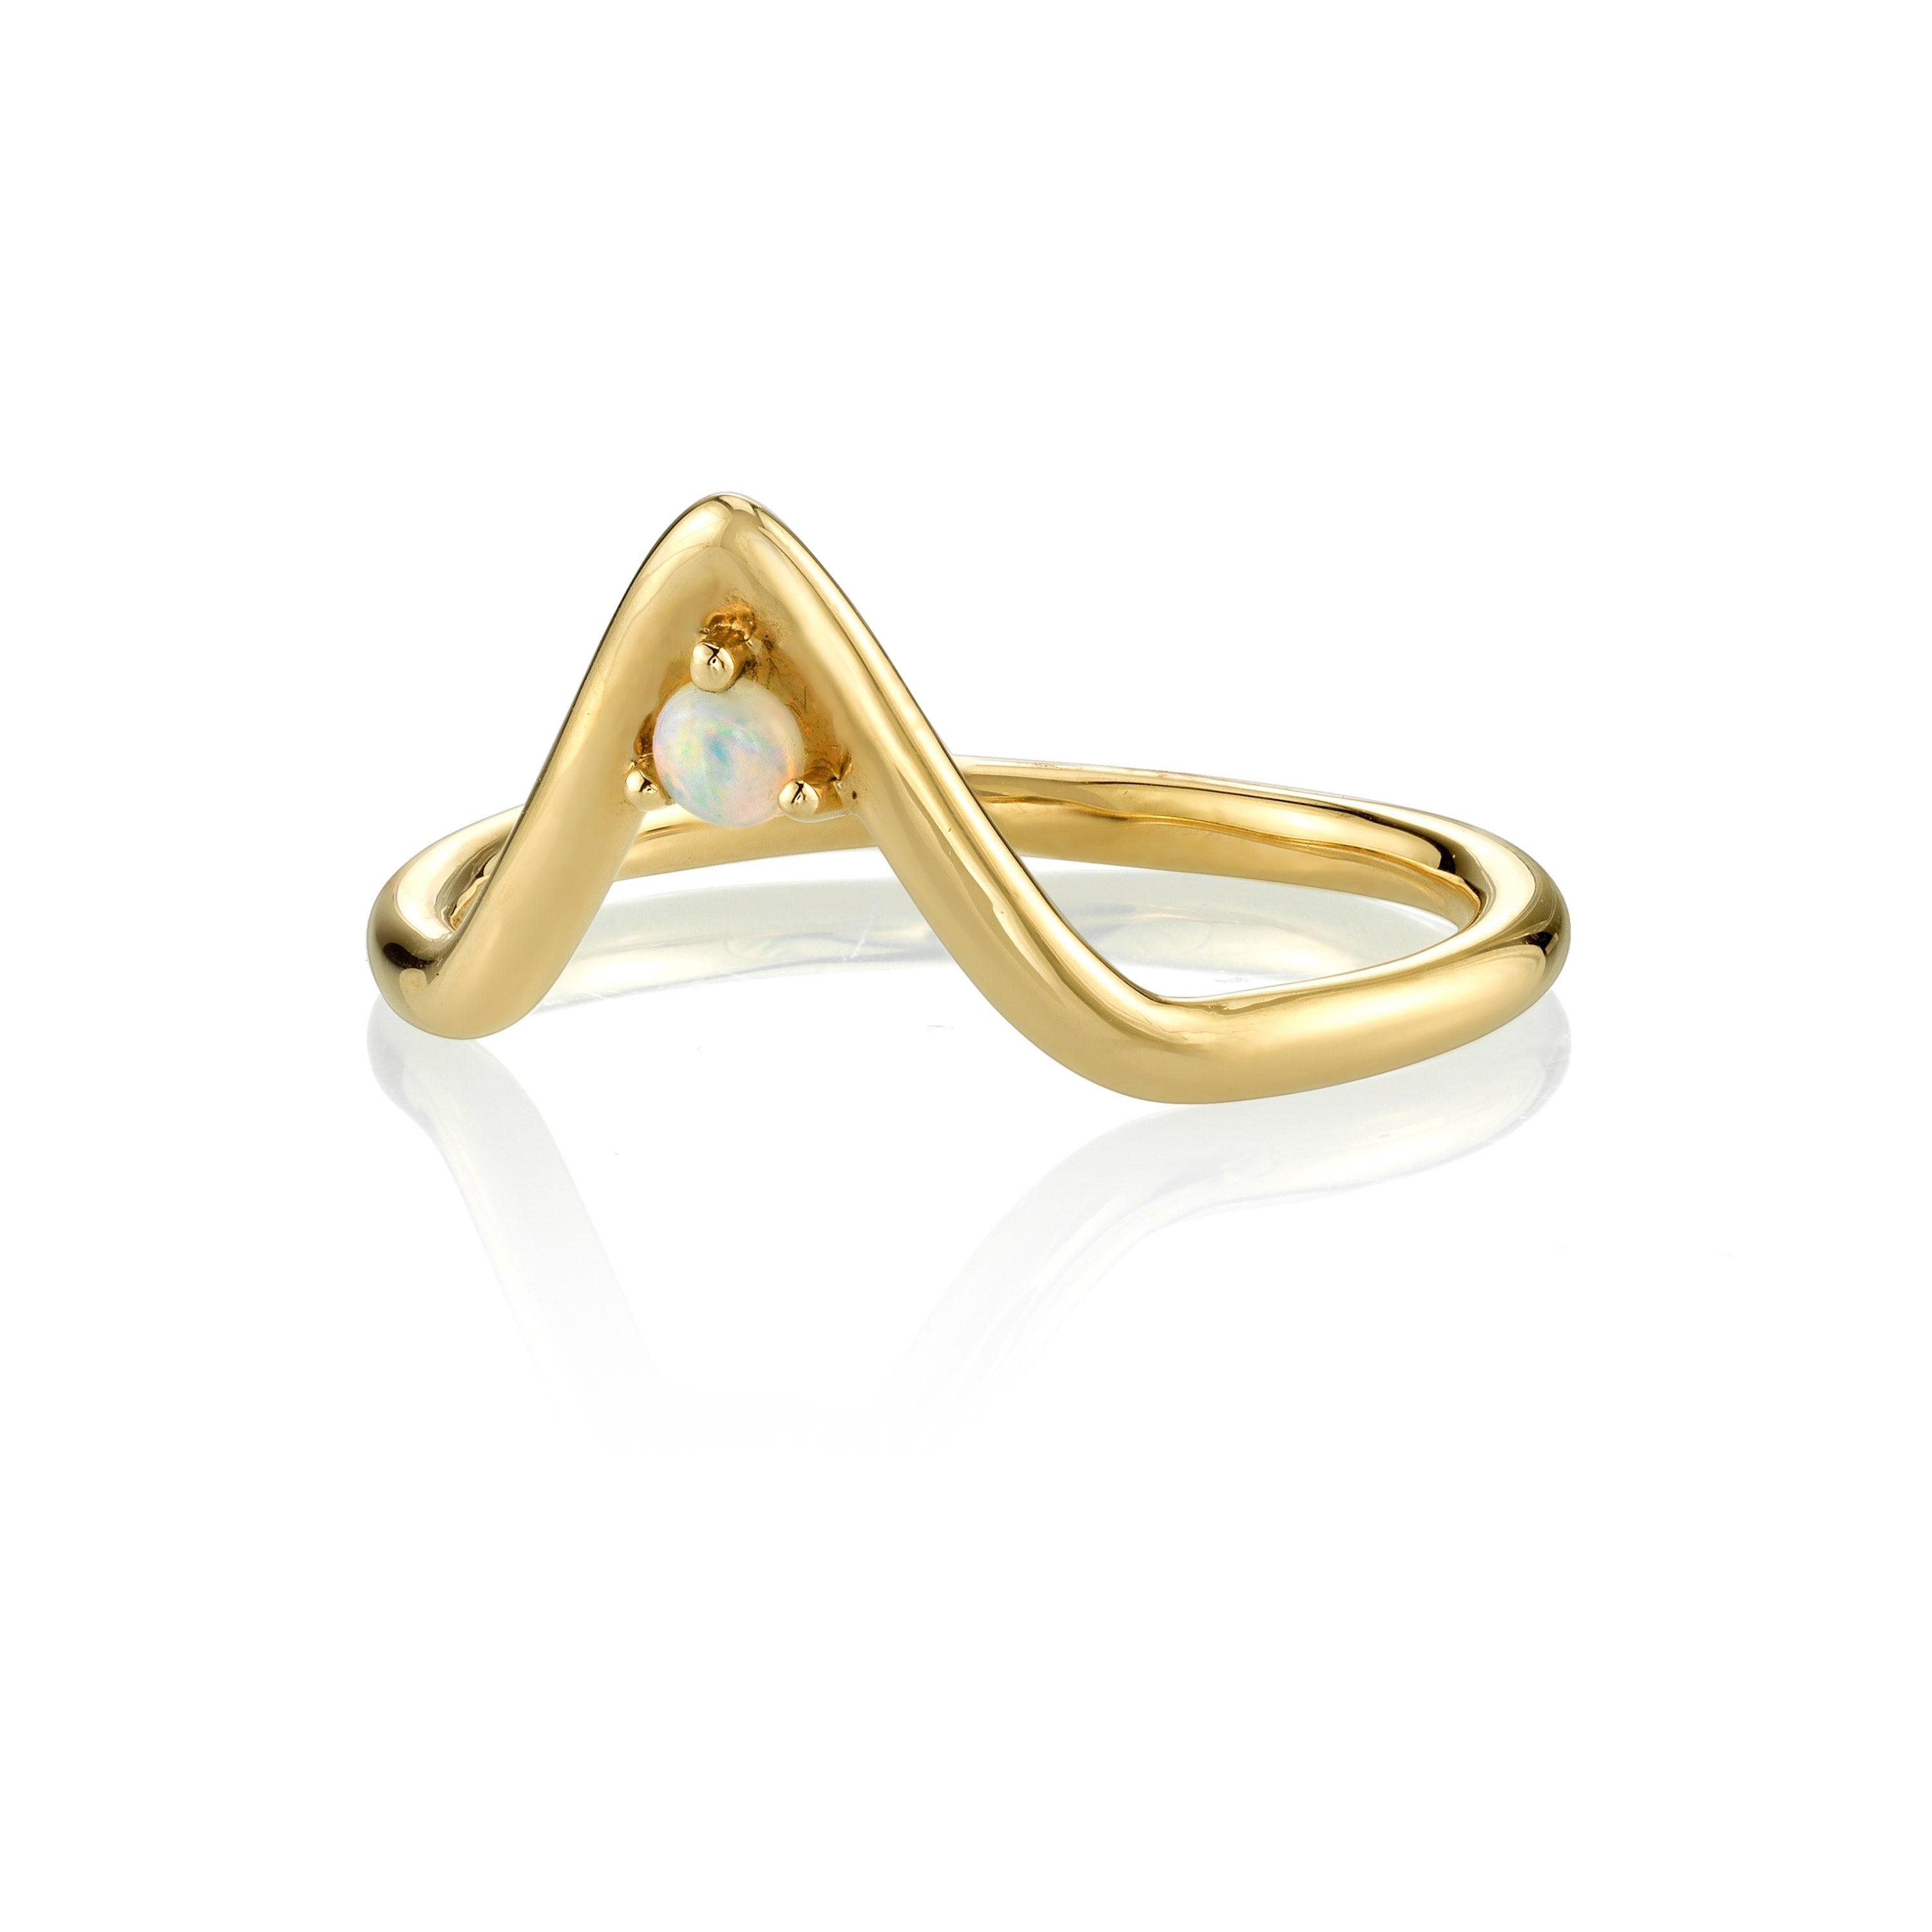 Marrow Fine Jewelry Traingle Stacking Ring With Opal Accent in Triangle Peak